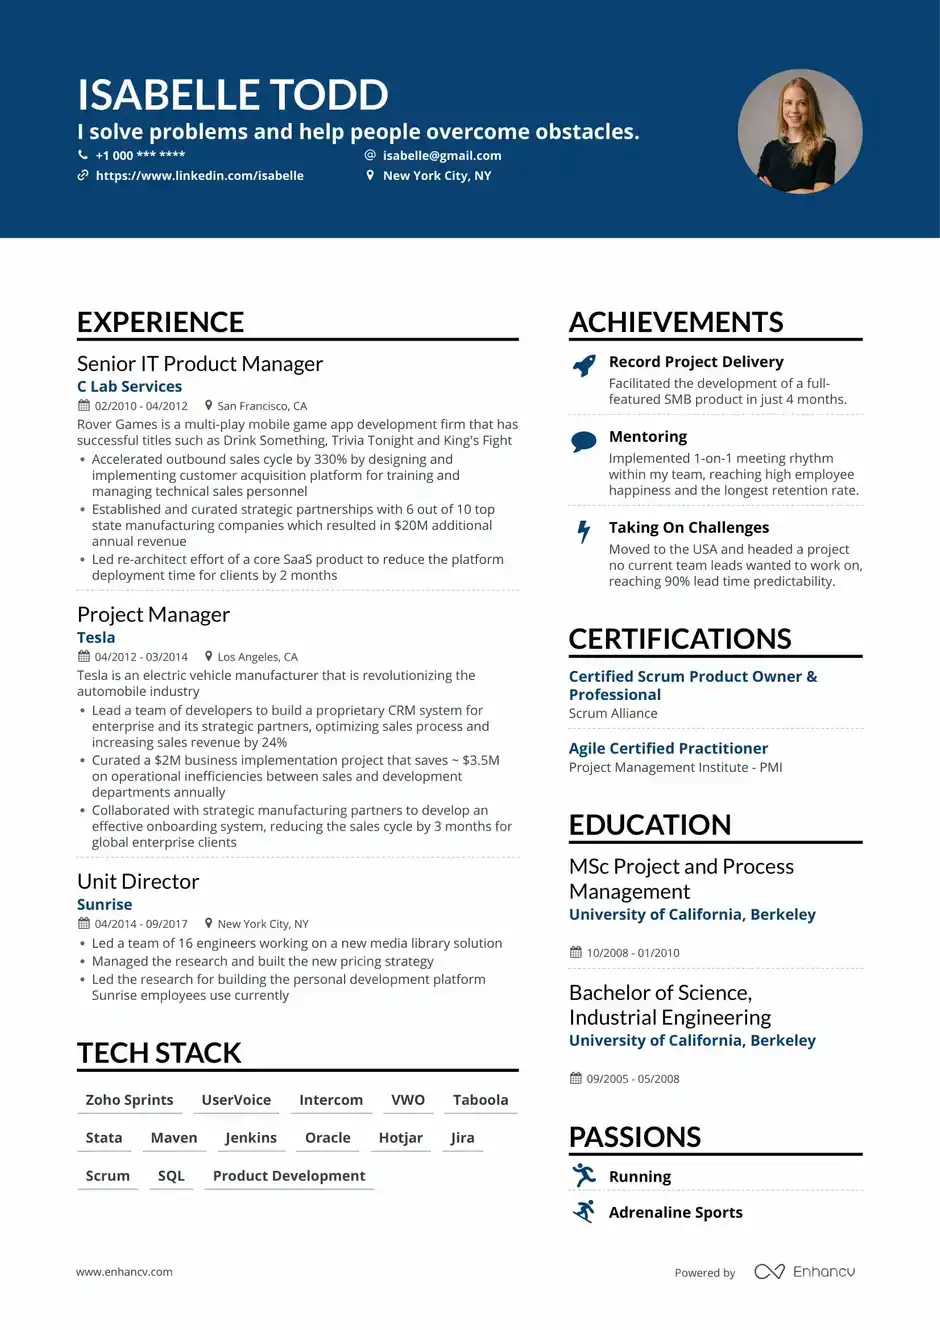 More on resume